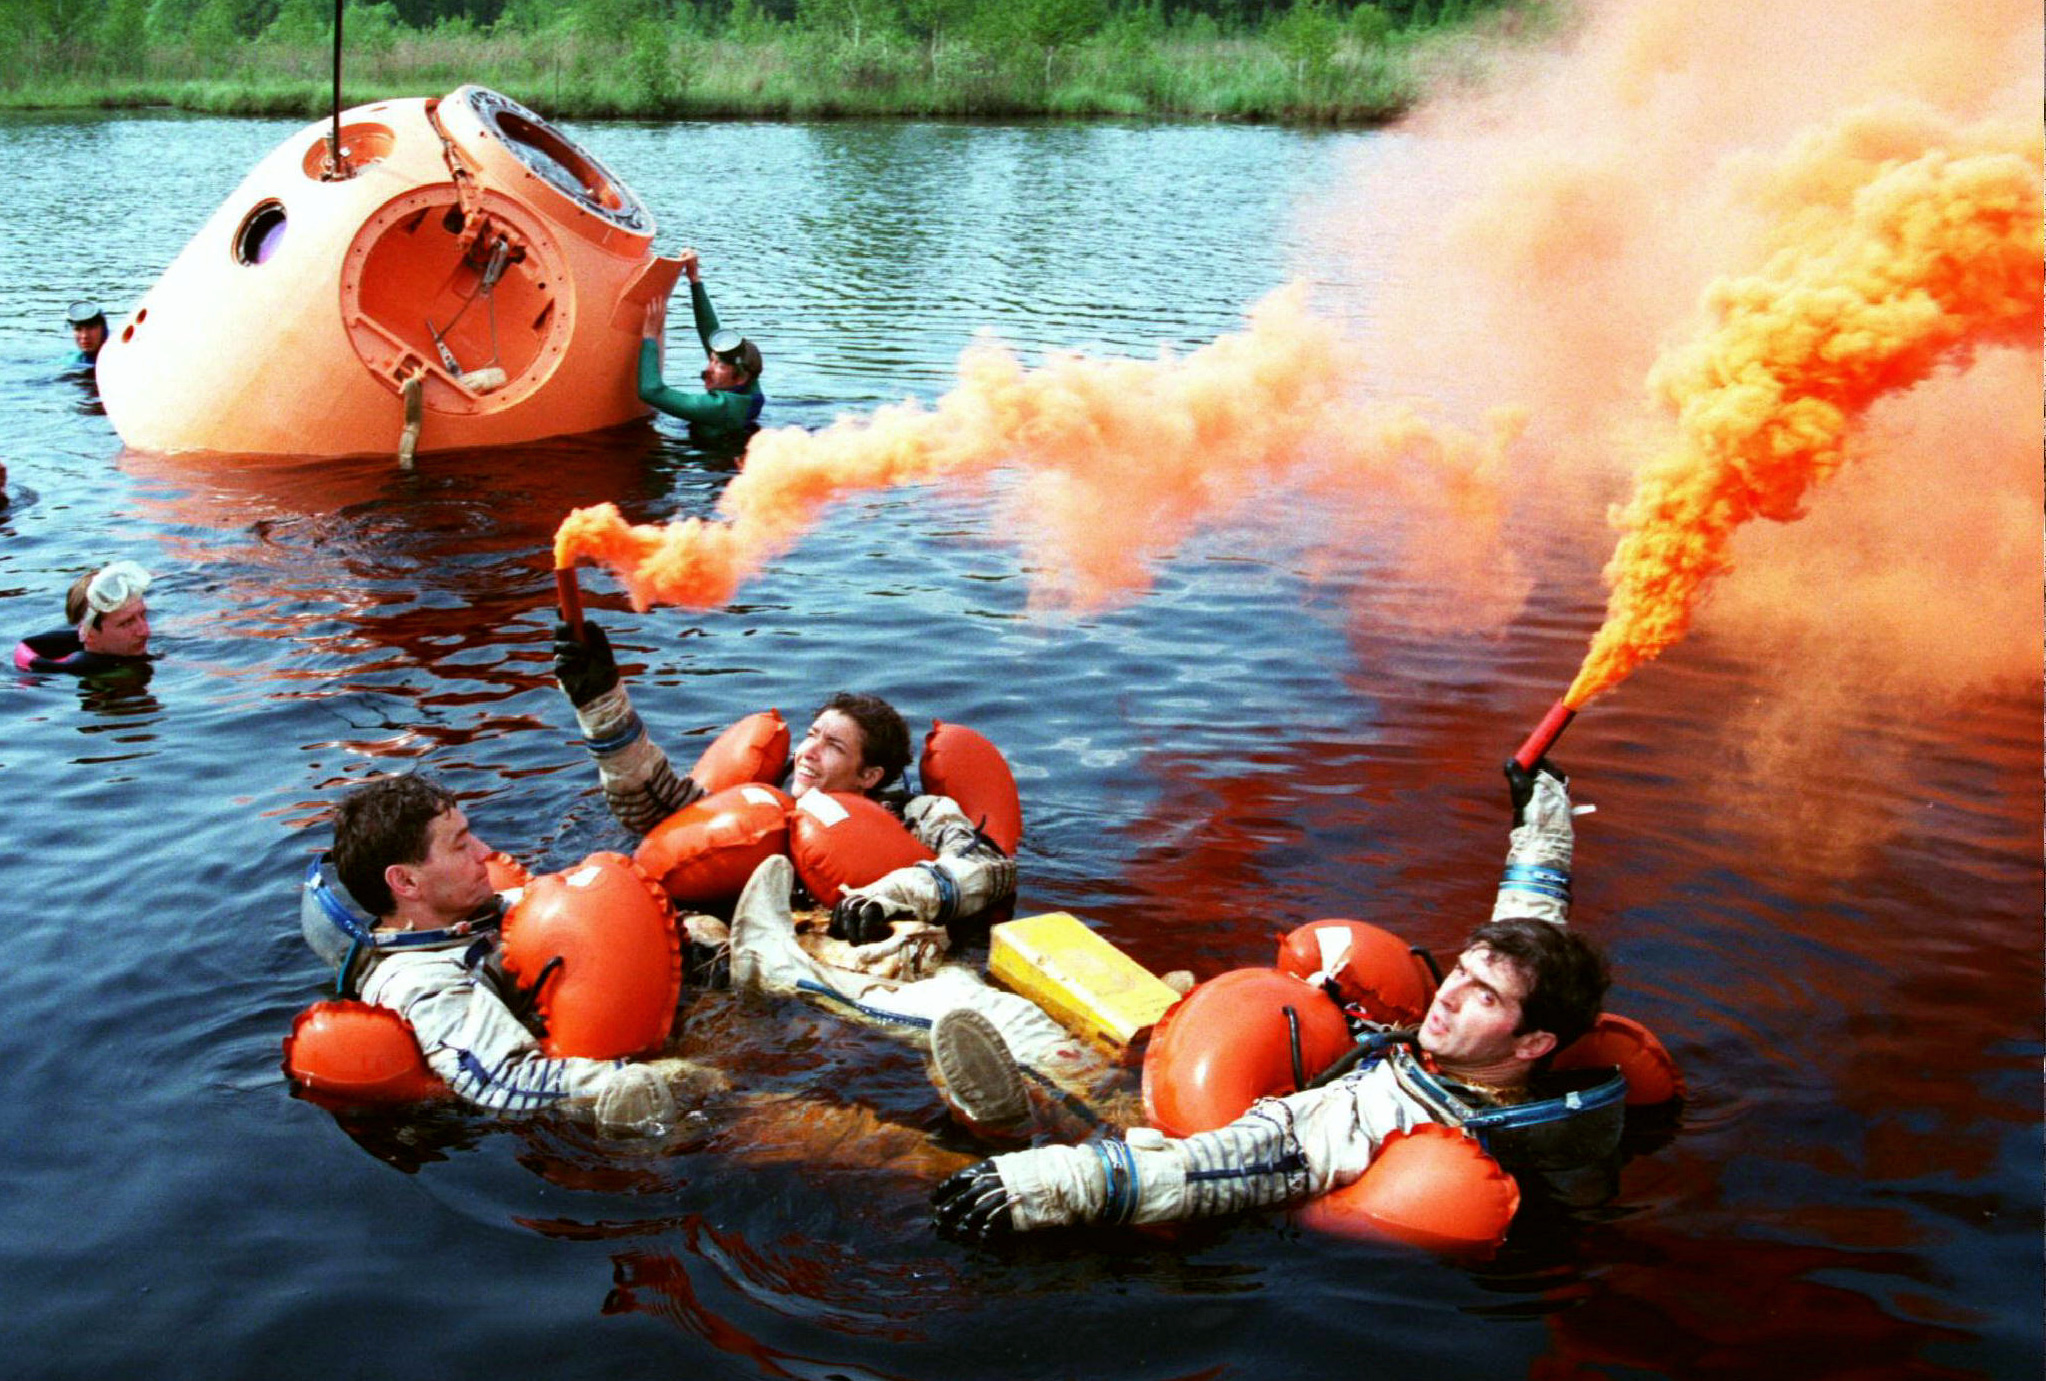 Valery Korzun of Russia, Claudie Andre Deshays and Leopold Eyharts of France signal to a rescue-helicopter in a lake in the outskirts of Moscow on May 31 during a training session for the landing of the space modul into water. Leopold Eyharts was a back up for Claudie Andre Deshays for a space flight on Russian orbital Mir station, shedulled for Summer of 1996.